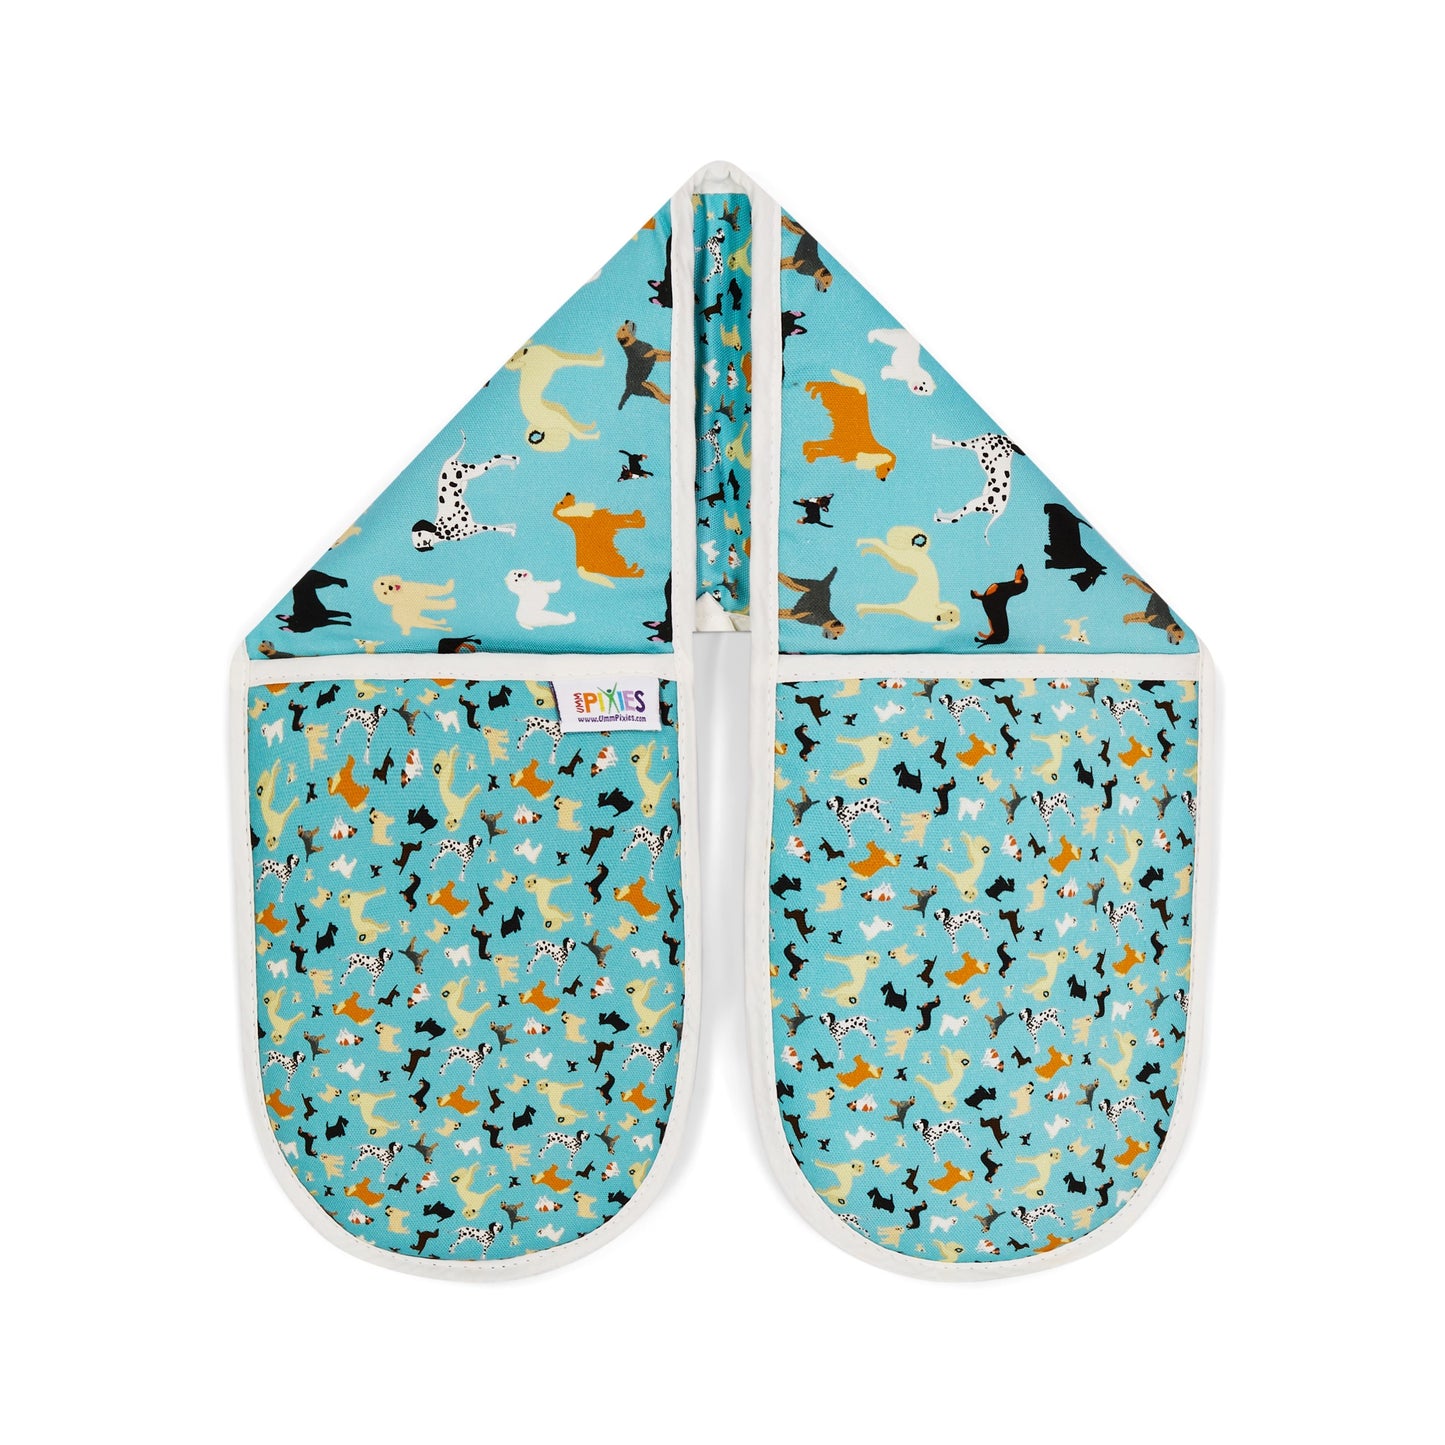 Blue Dogs Oven Gloves in Organic Cotton